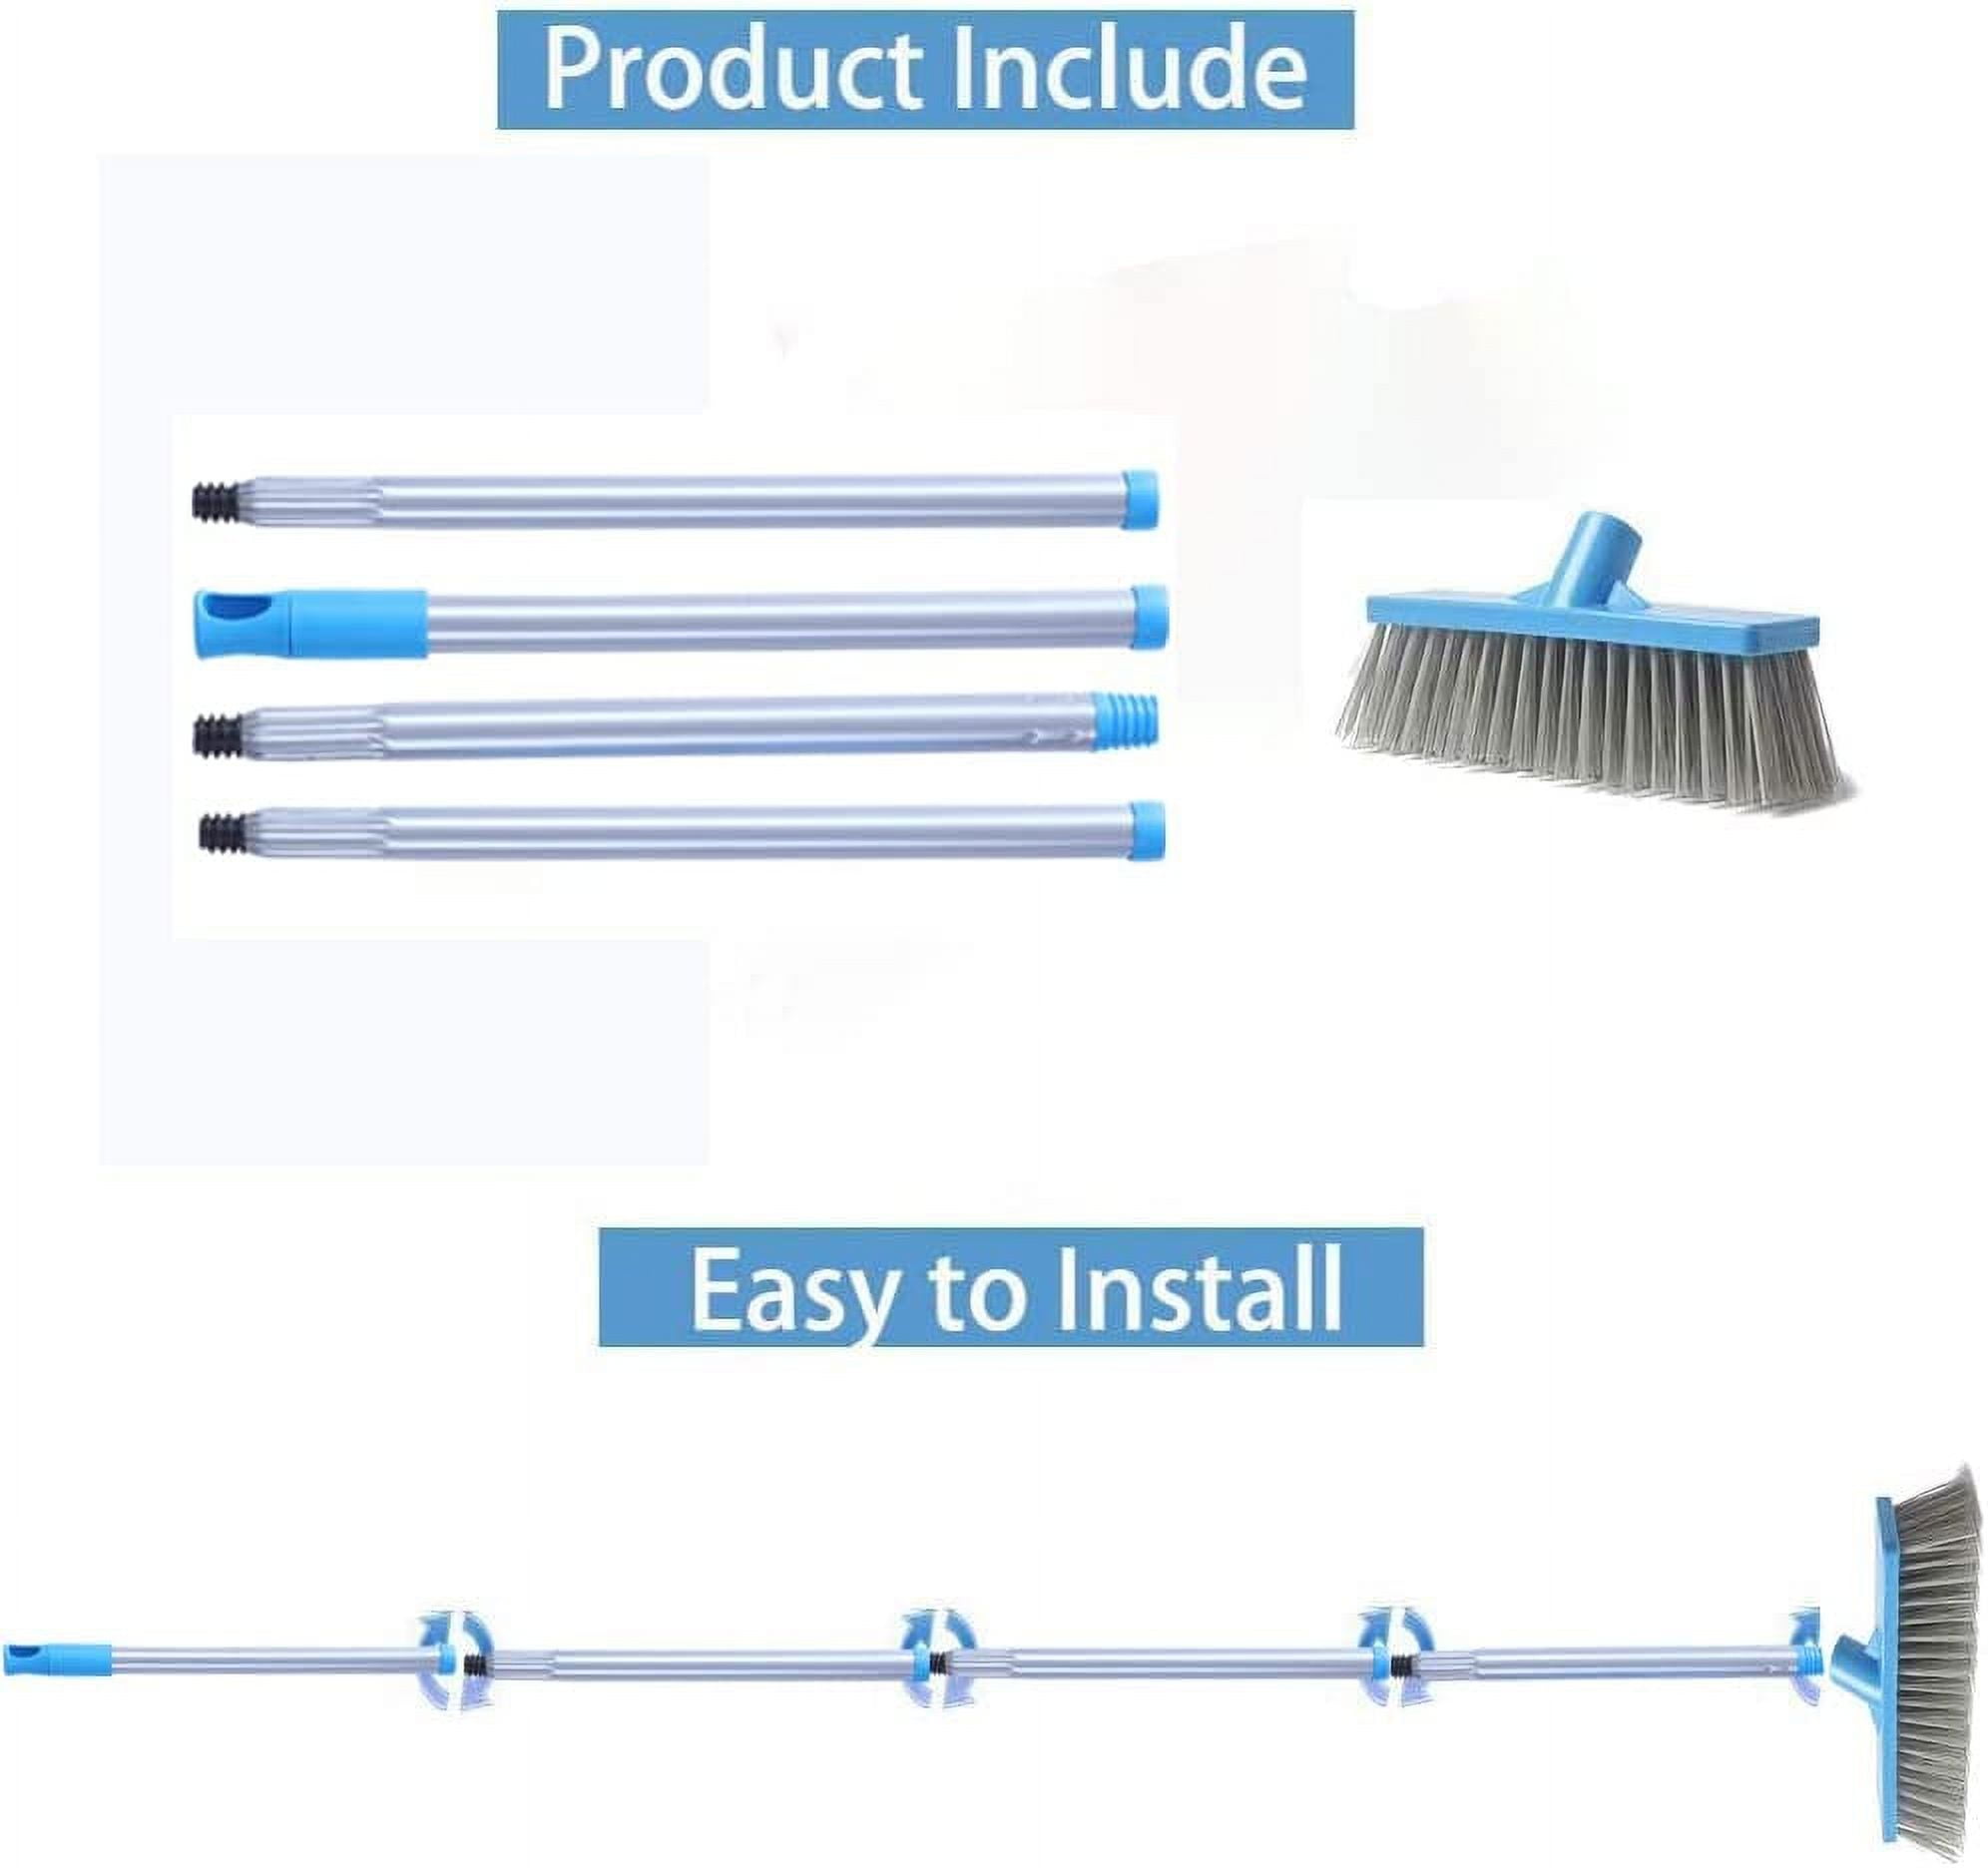 48 Wholesale All Purpose Scrub Brush With Handle - at 